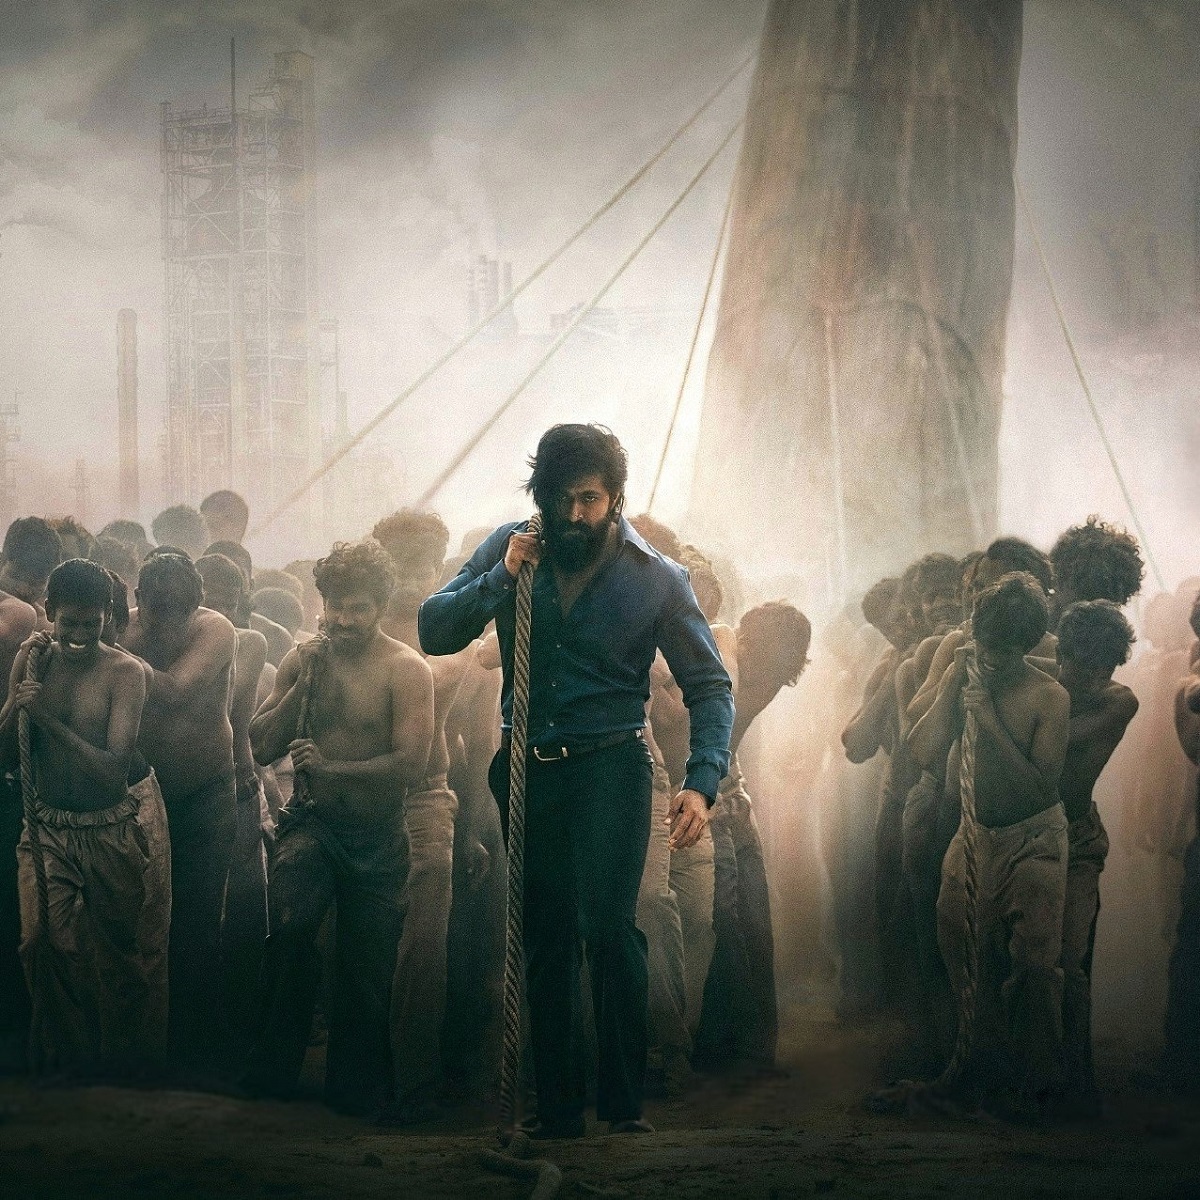 Box Office: Yash starrer KGF Chapter 2 pulls a powerful $4 million plus opening day Overseas